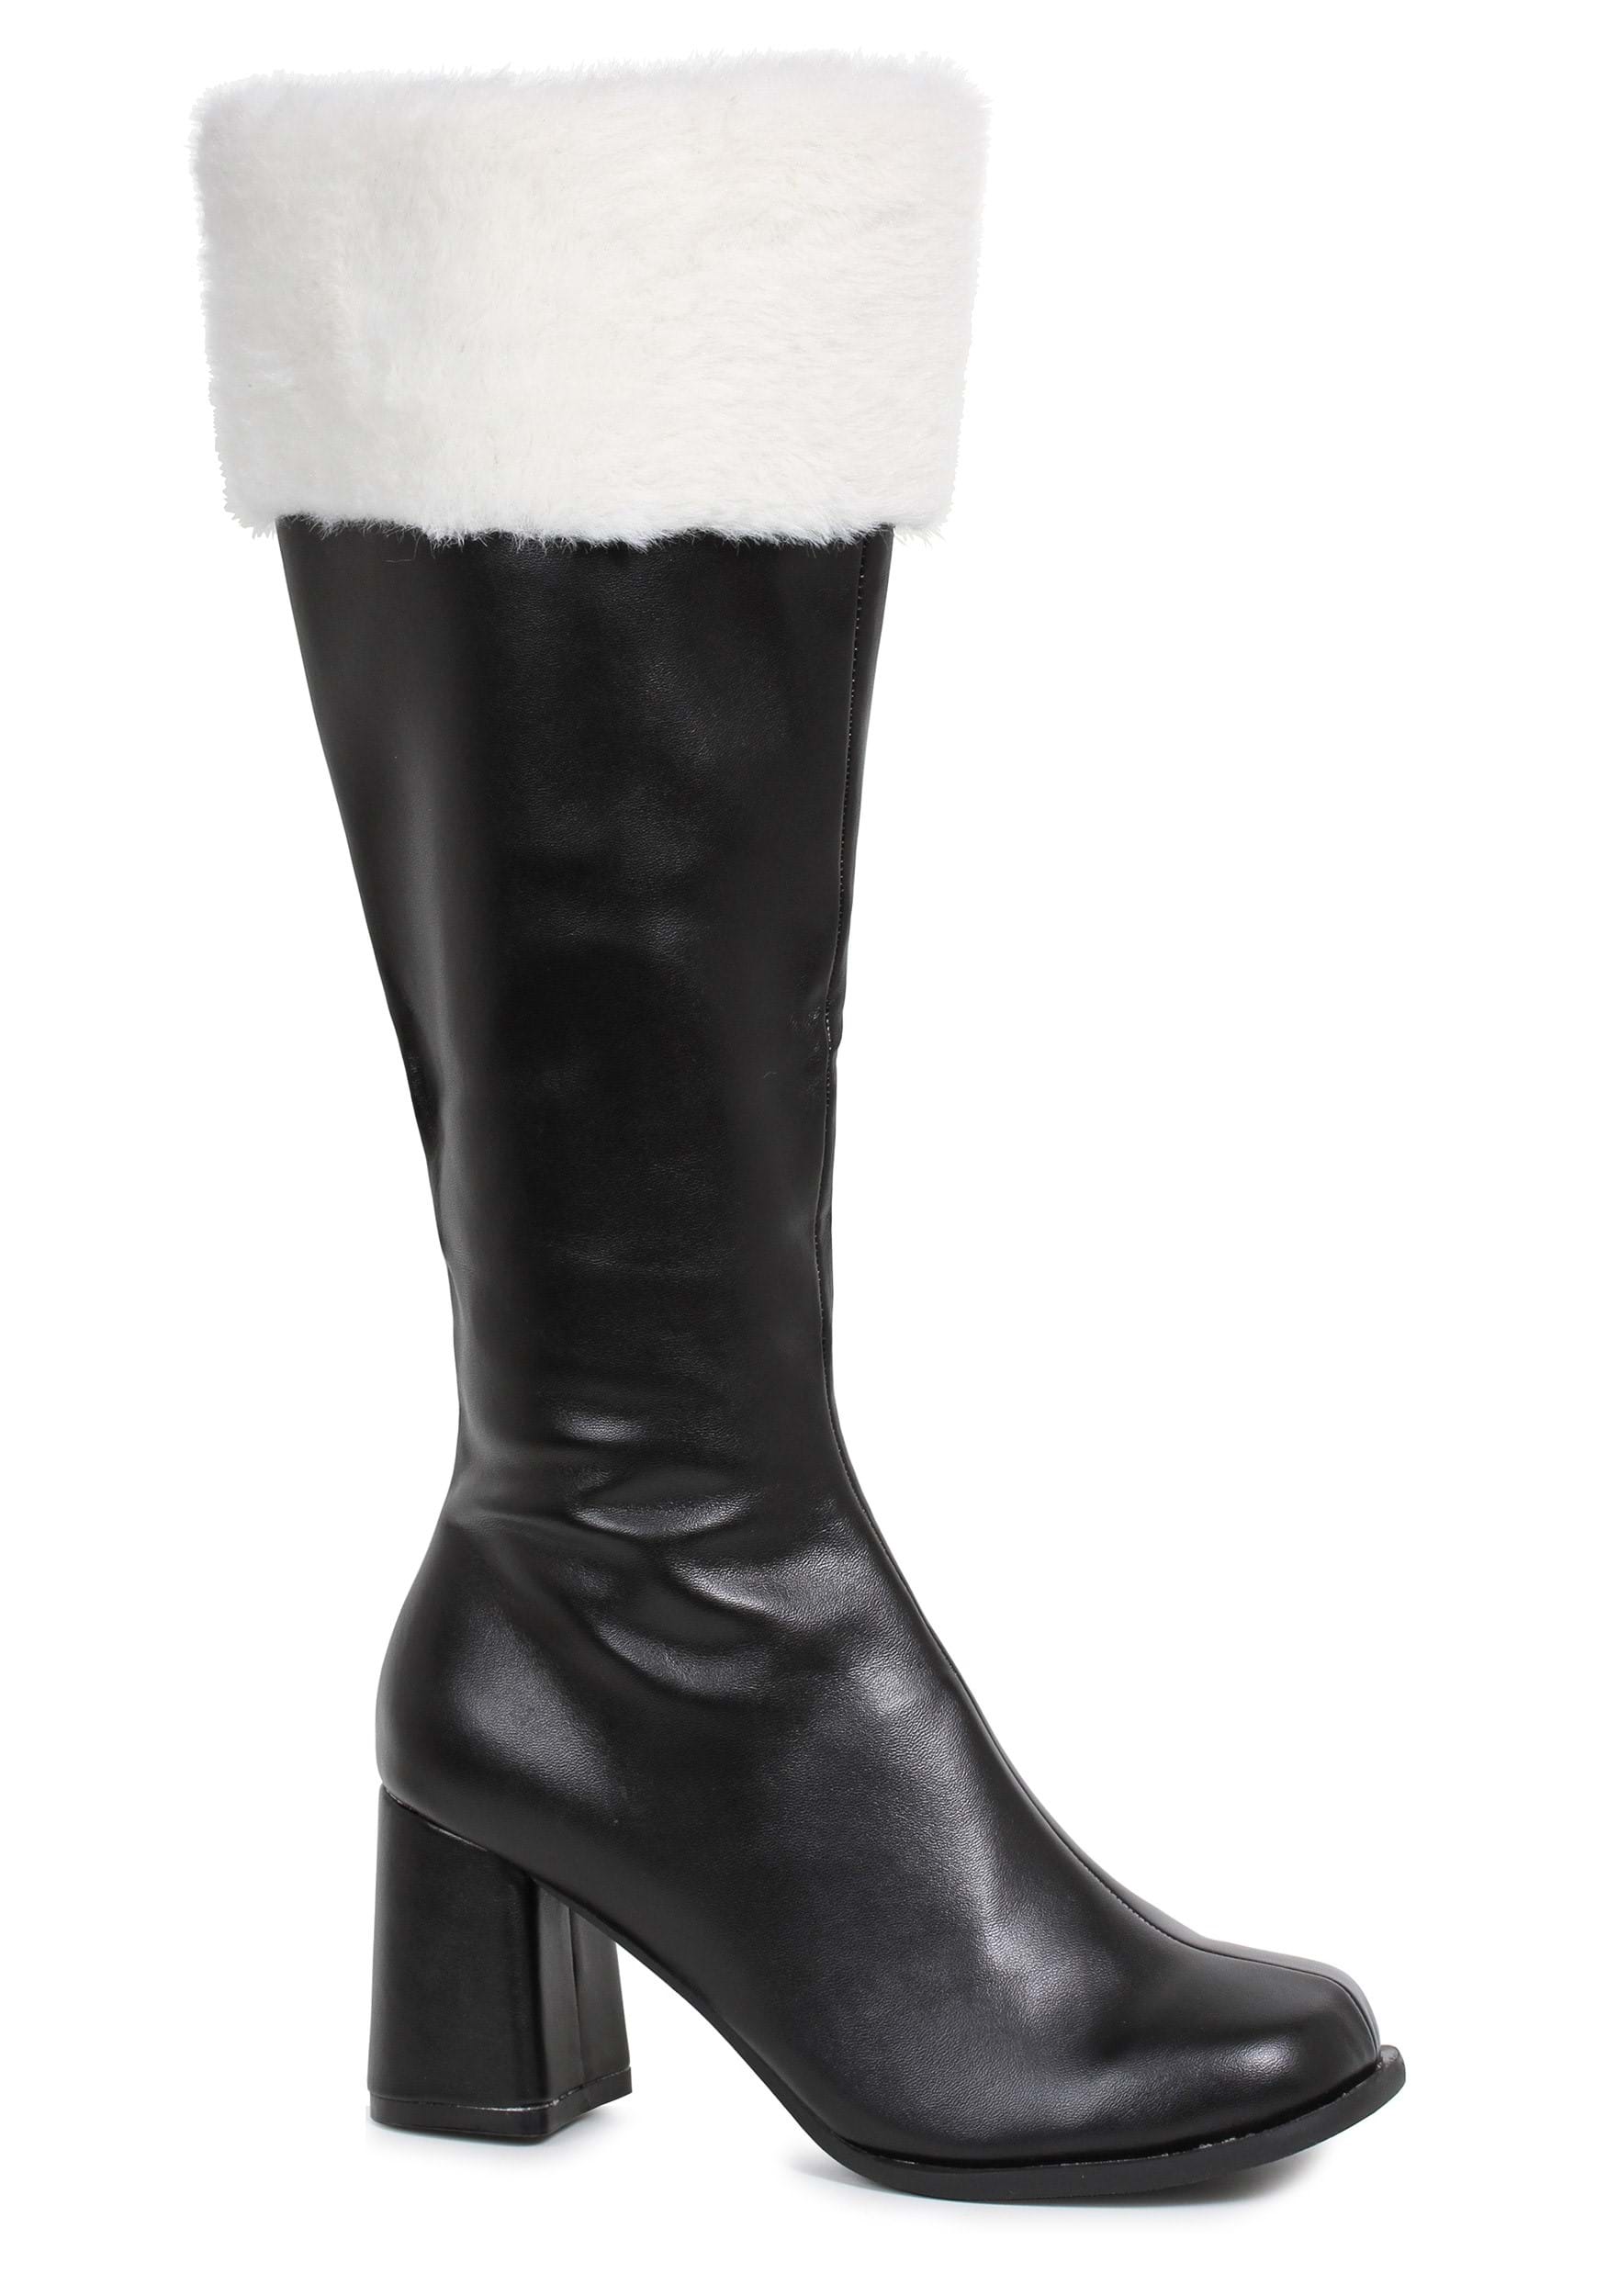 Gogo Fur Topped Mrs. Claus Boots for Women